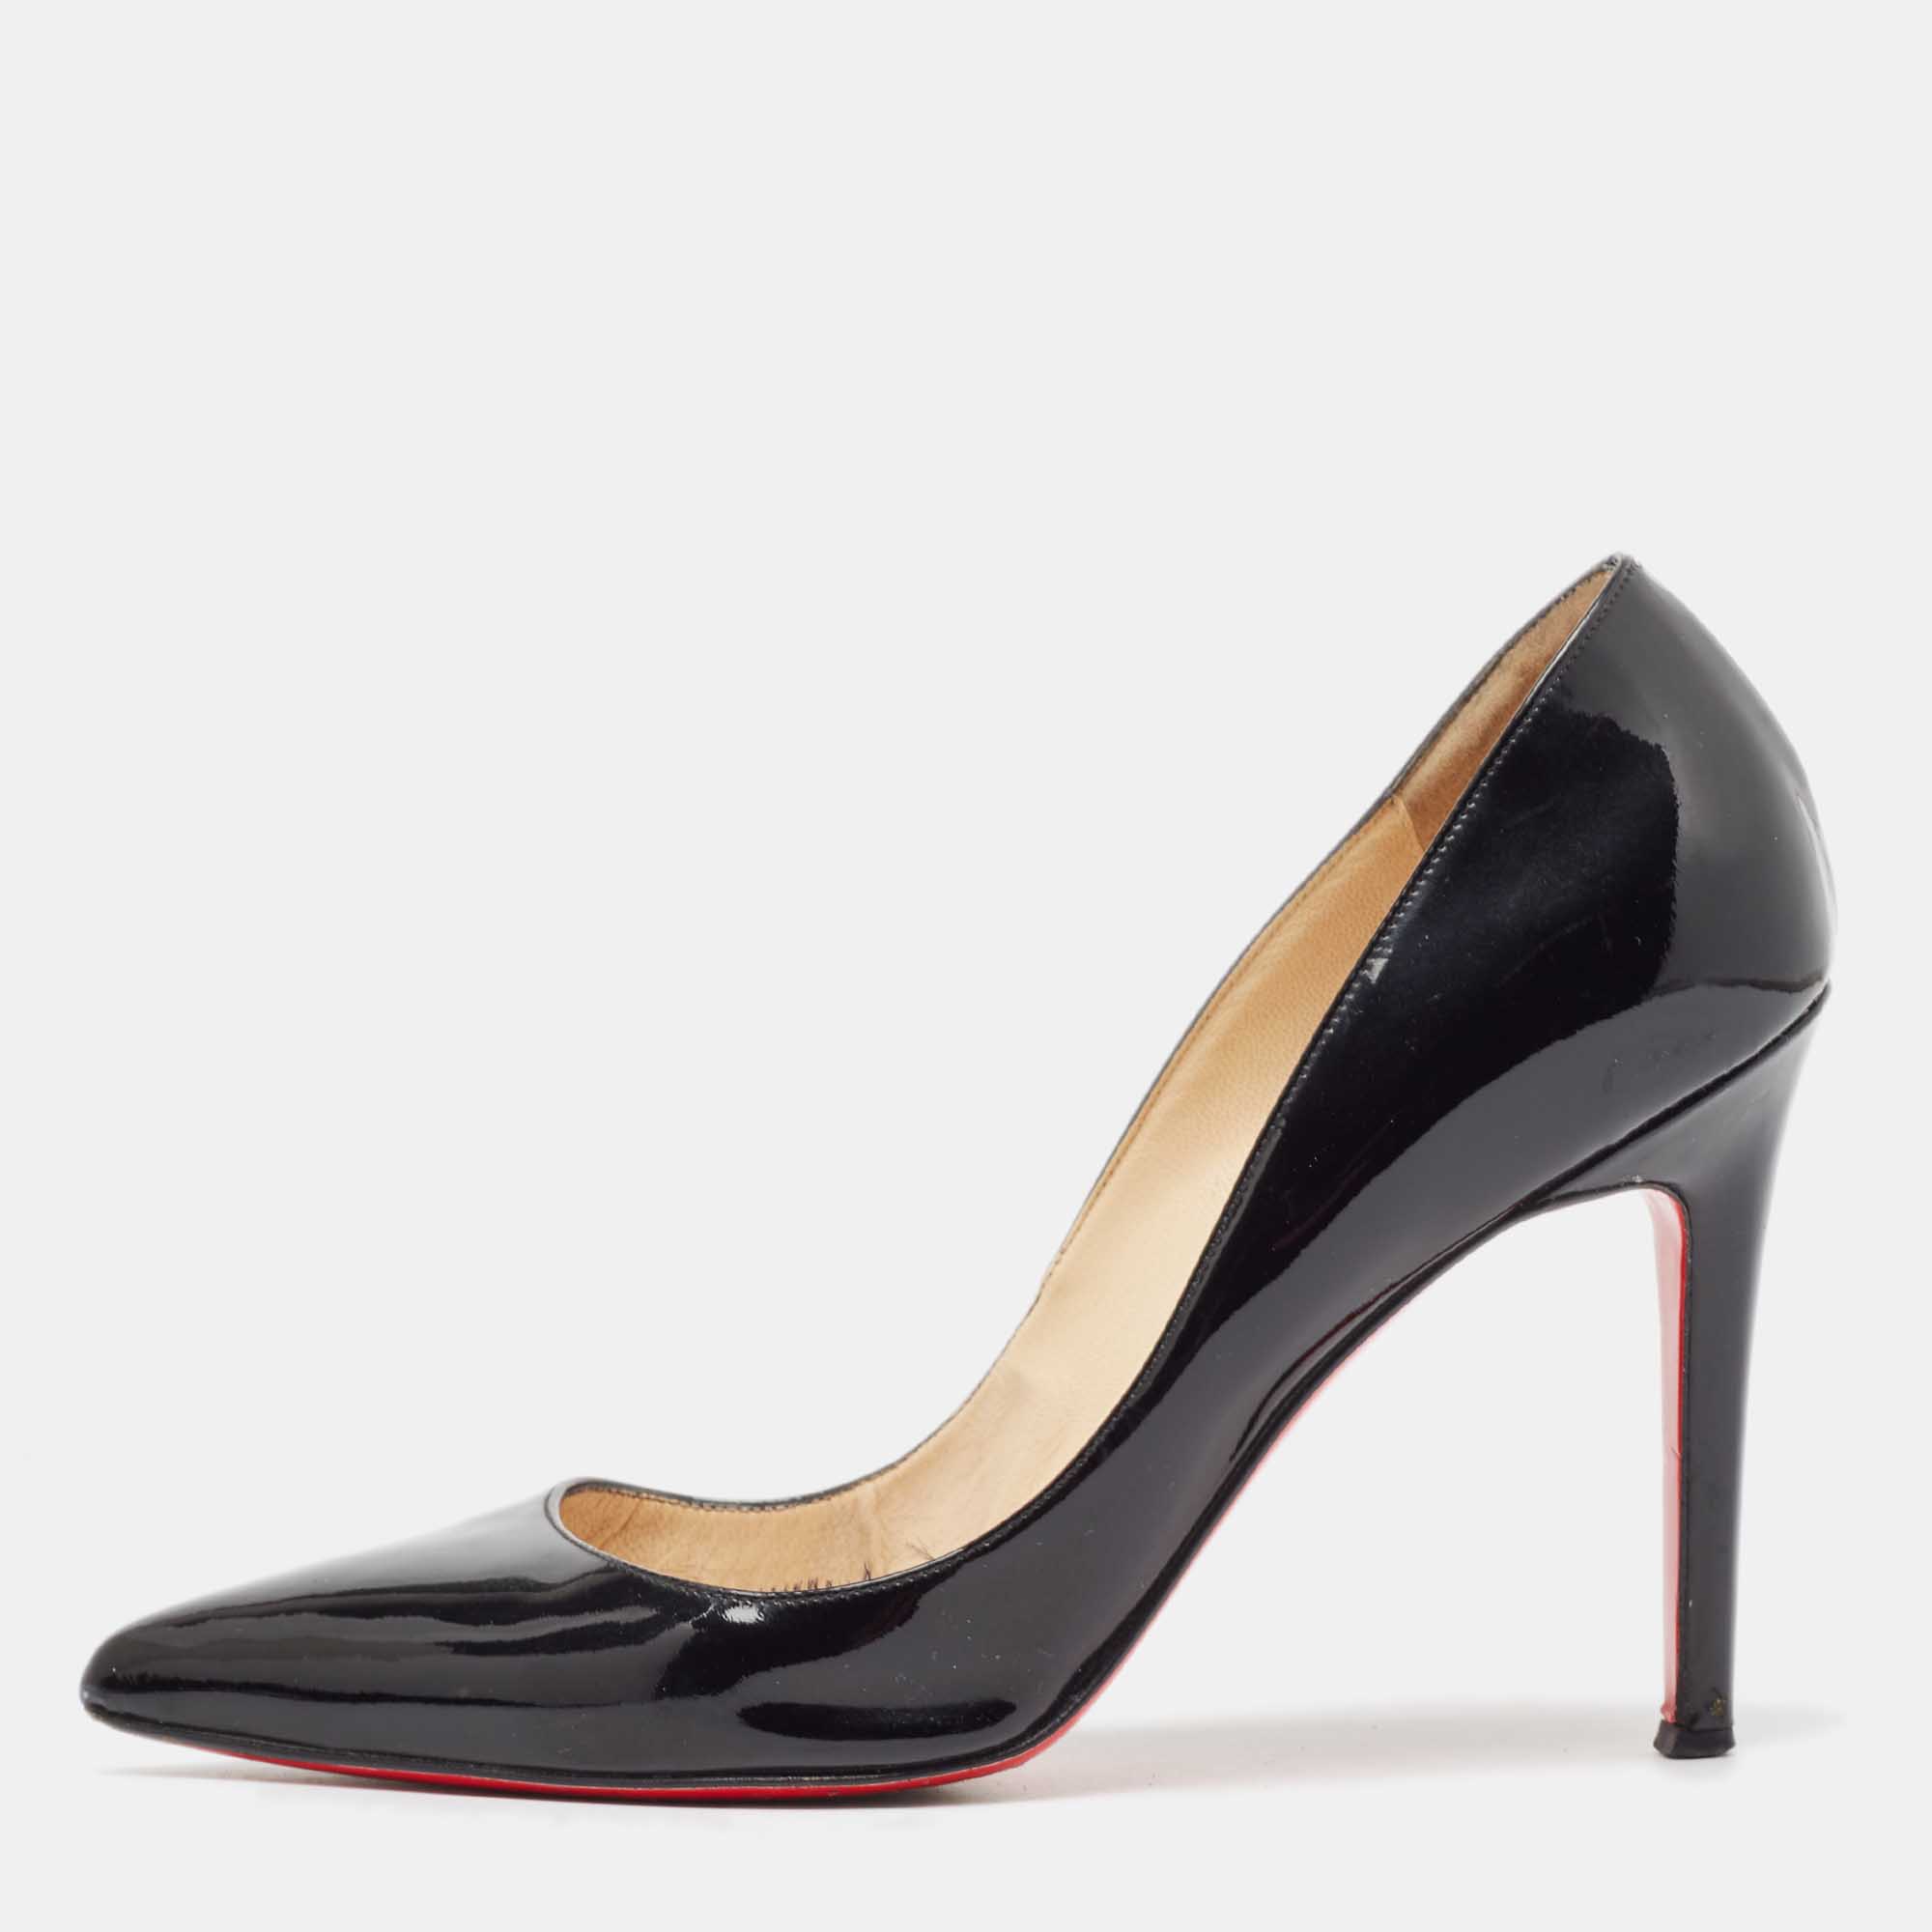 Christian louboutin black patent leather pigalle pumps size 38.5